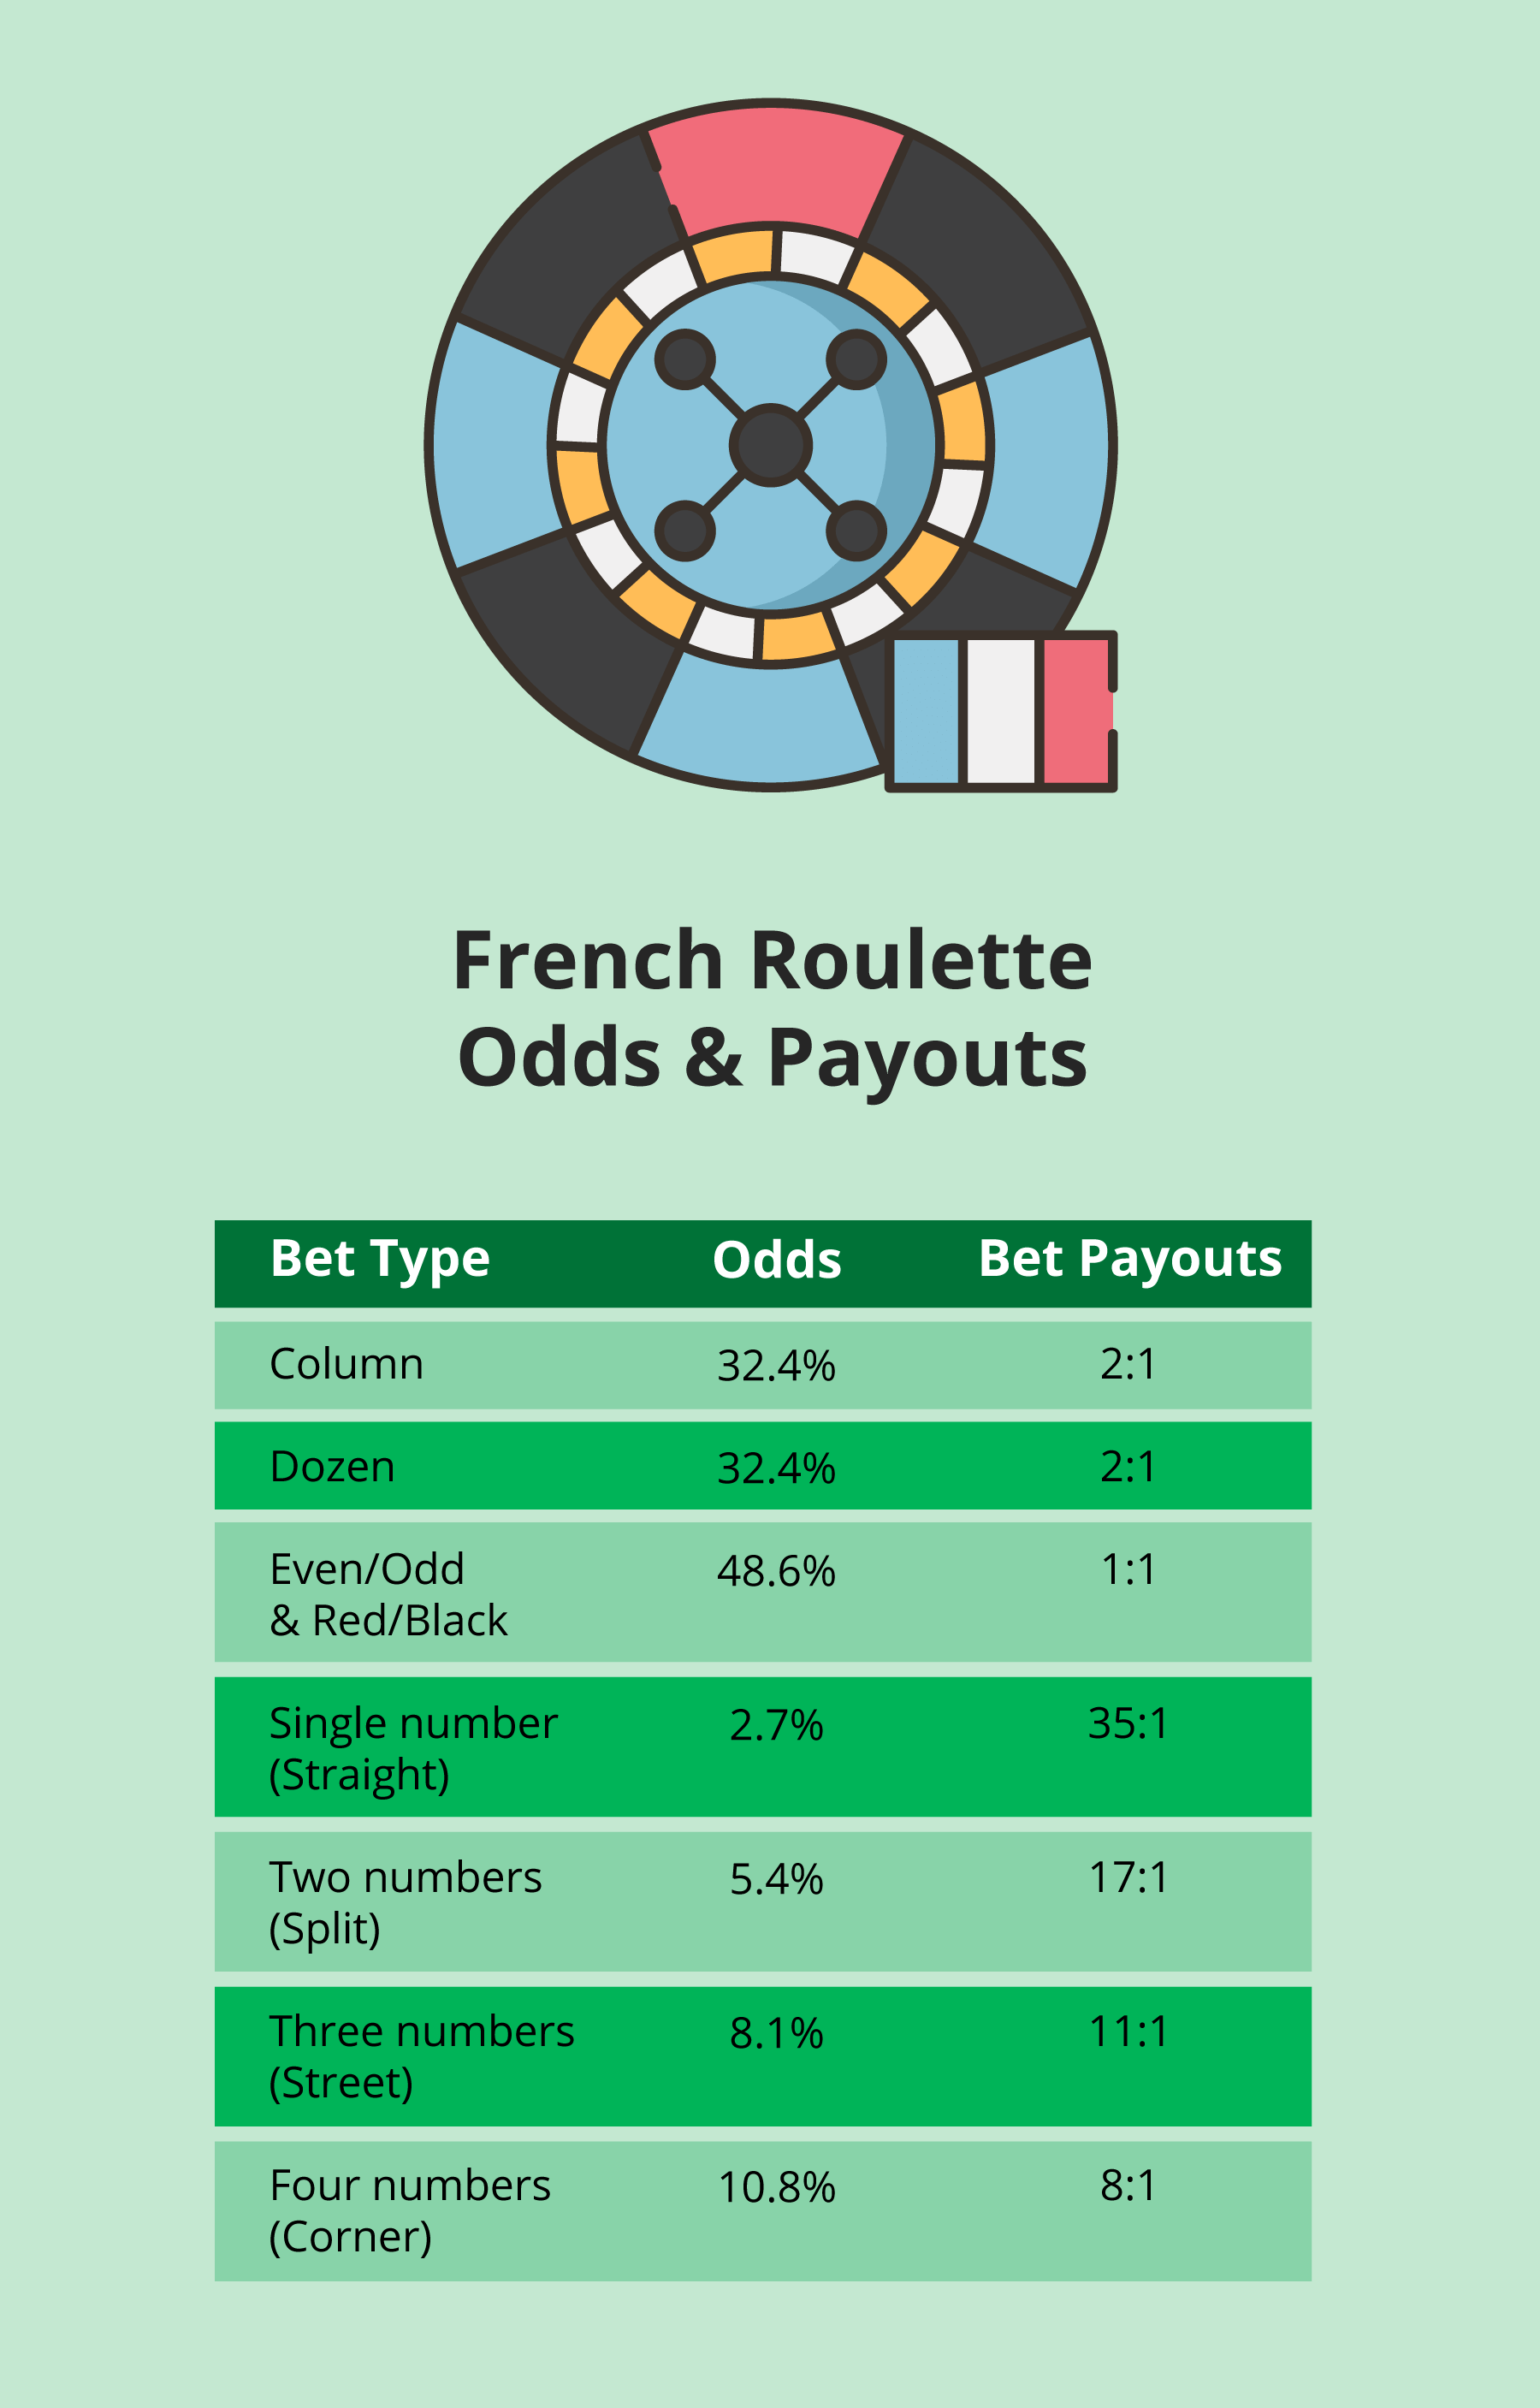 French Roulette Odds & Payouts NZ casino